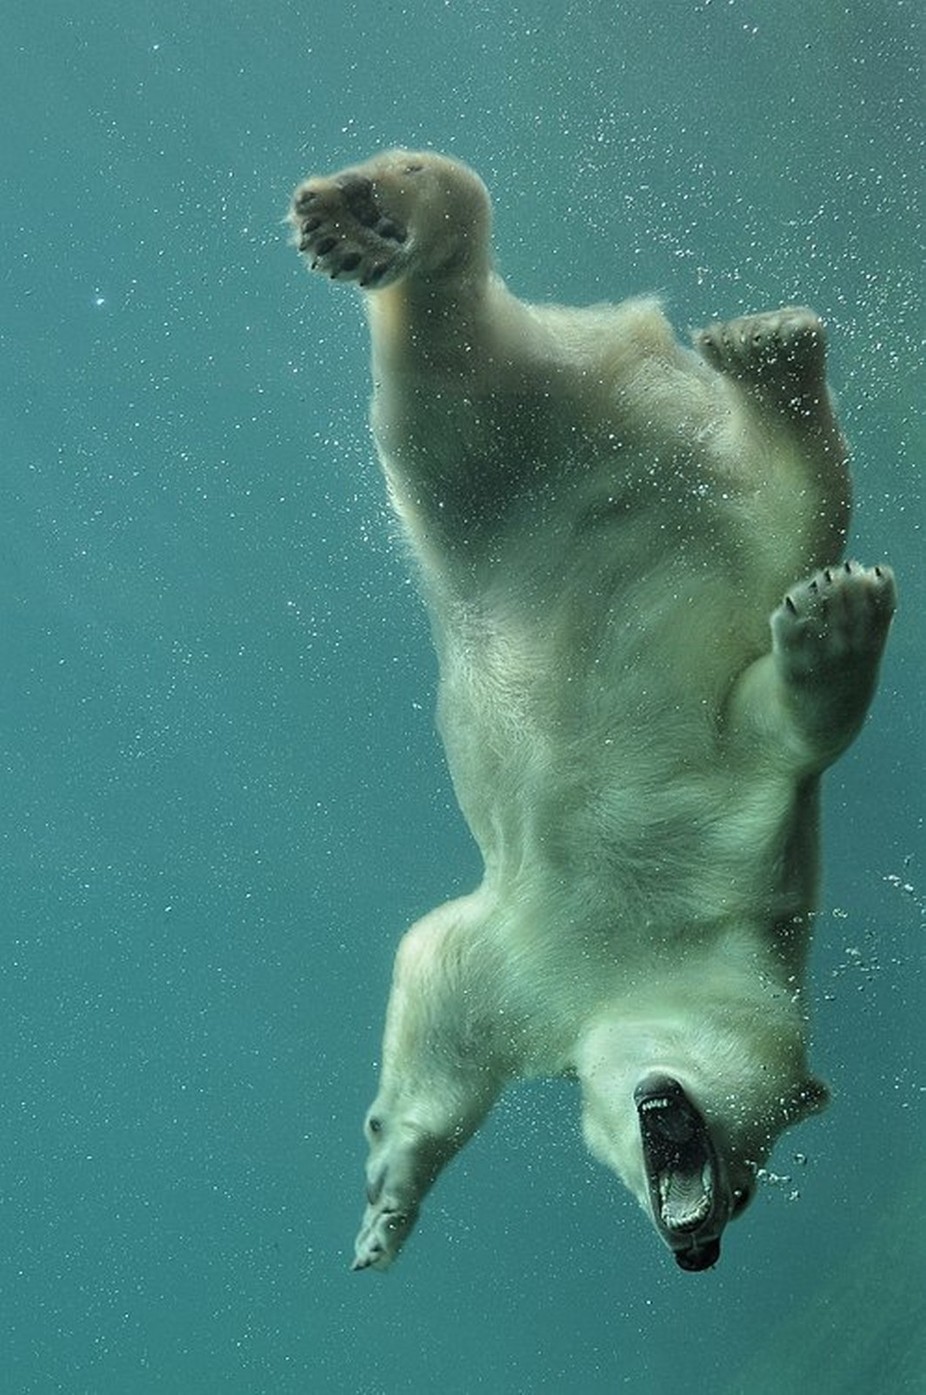 Polar bear by TillyMeijer - Picturing Aquatic Animals Photo Contest